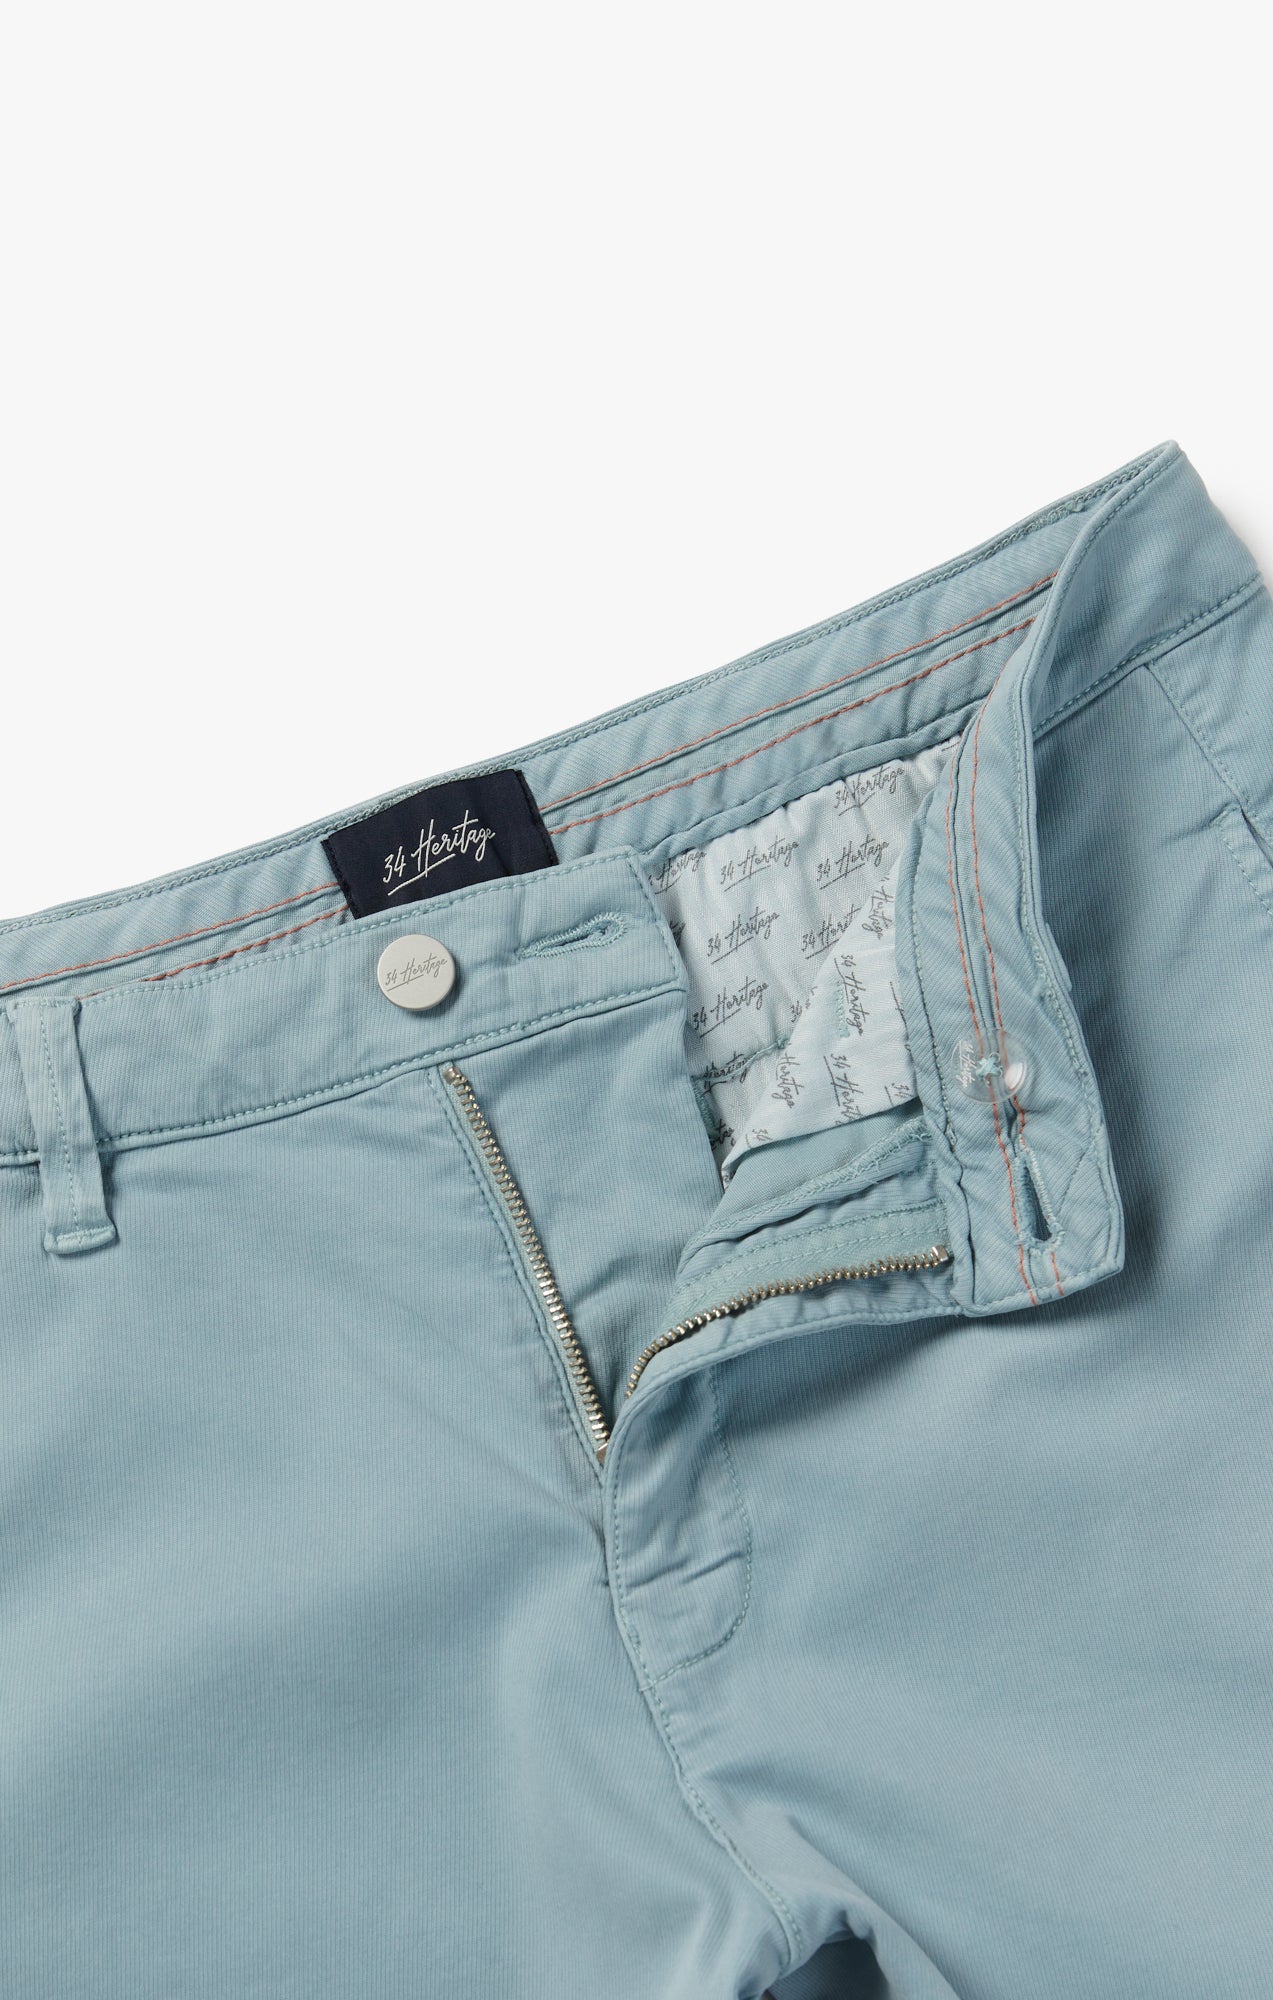 Nevada Shorts in Light Blue Soft Touch Image 9